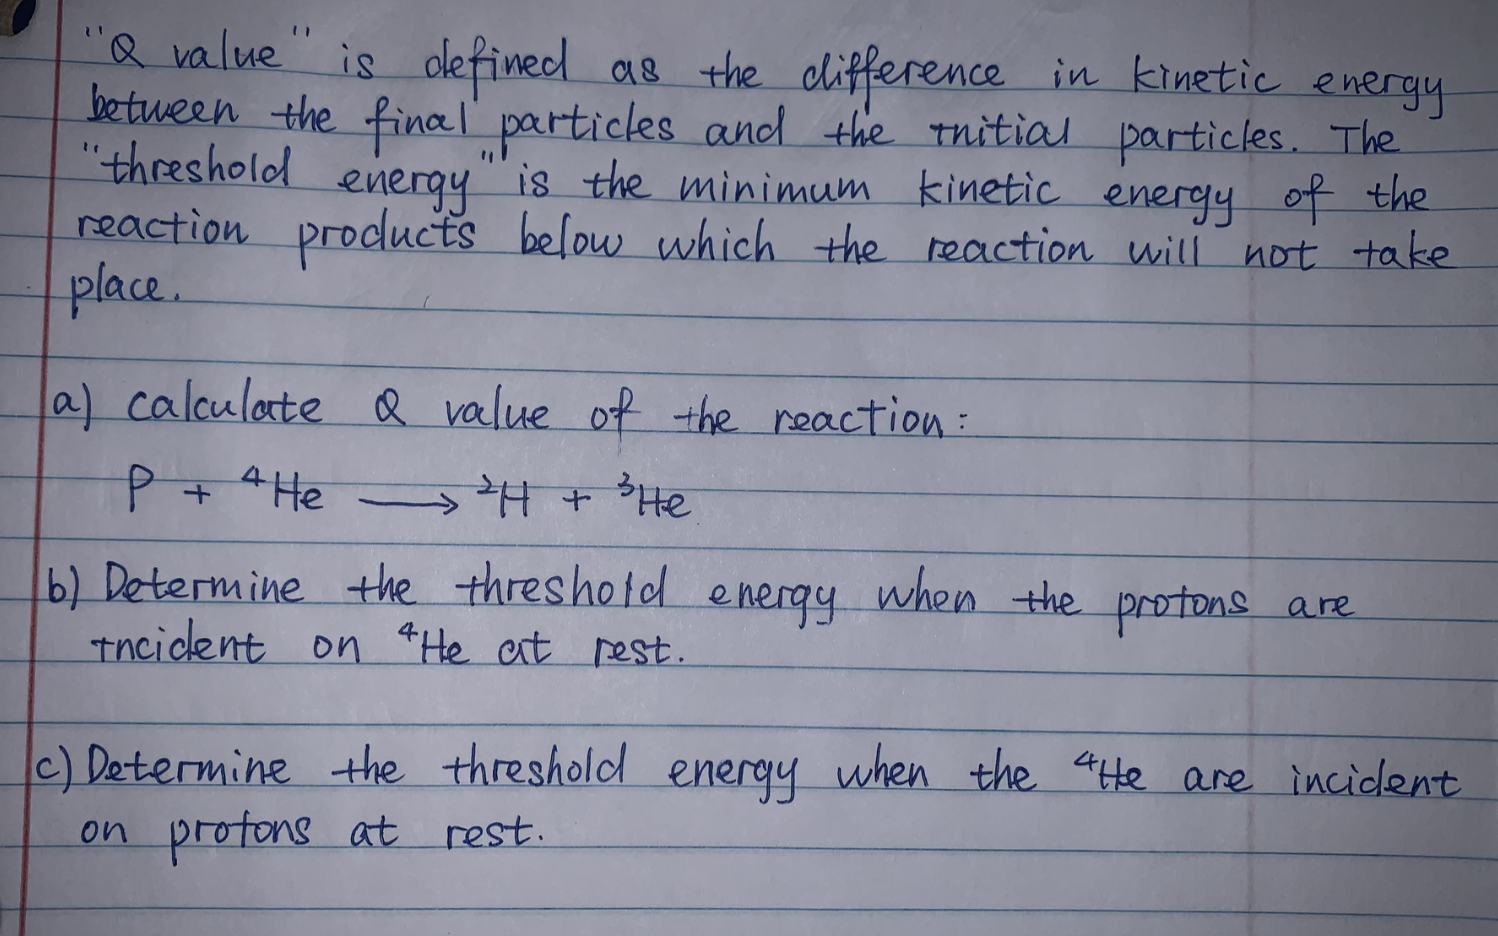 "Q value" is defined as the clifference in kinetic
between the final' particles and the tnitial particles. The
"threshold
energy
energy is the minimum kinetic energy of the
reaction prodlucts below which the reaction will not take
place.
la) calculate Q value of the reaction:
P+ He - +He
b) Determine the threshotd energy when the protons are
Tncident on *He at rest.
c) Determine the threshold
on profons at rest.
energy
when the 4te are incidlent
